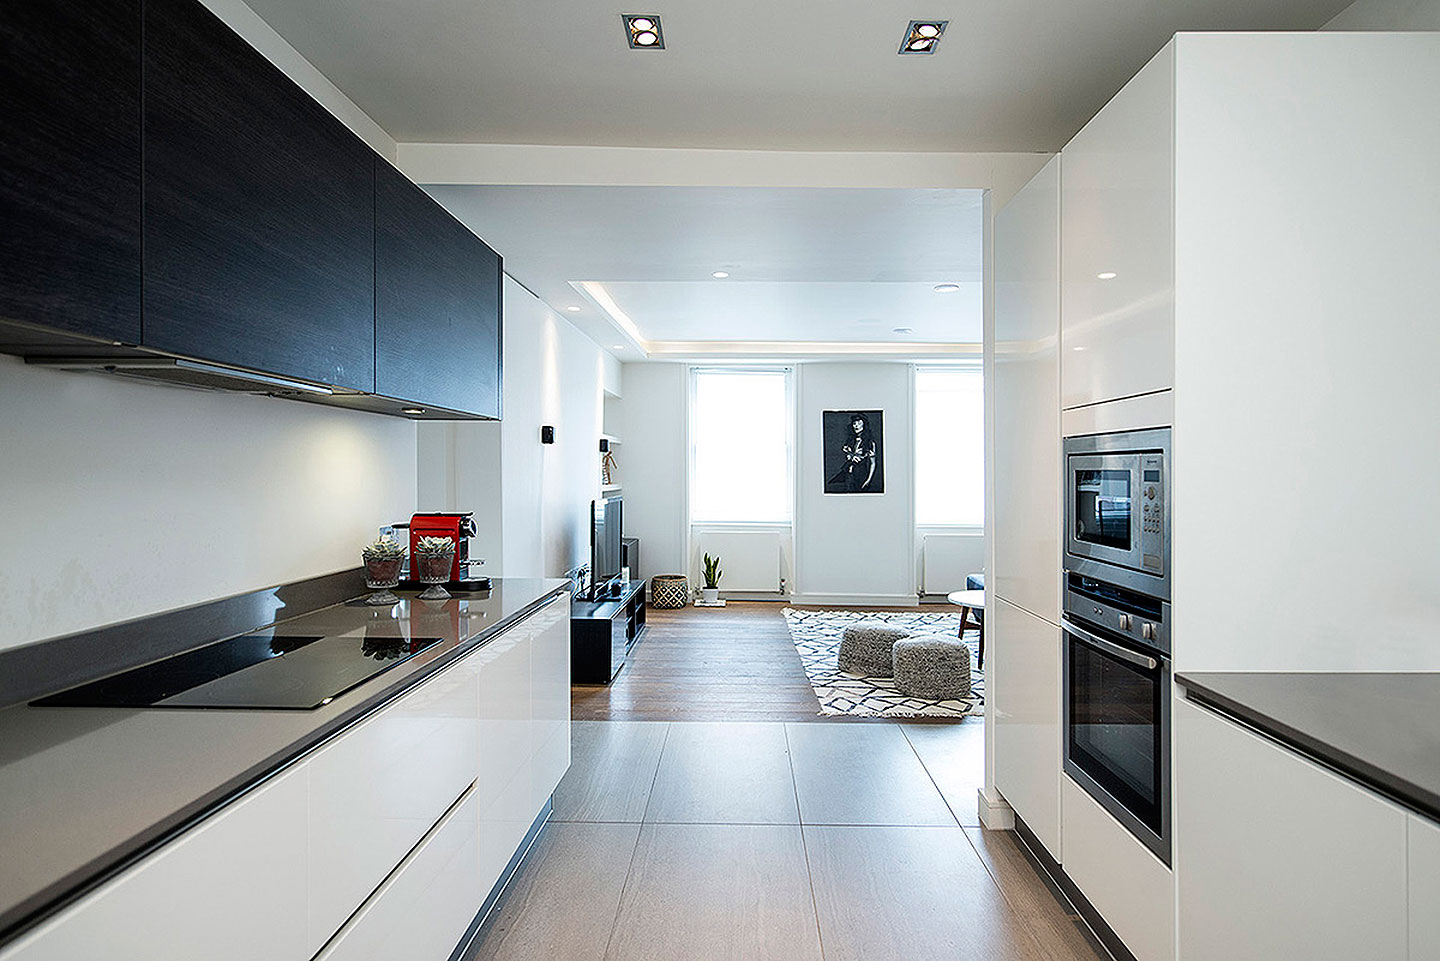 Designer Kitchens for central London high quality apartments | TBK Direct